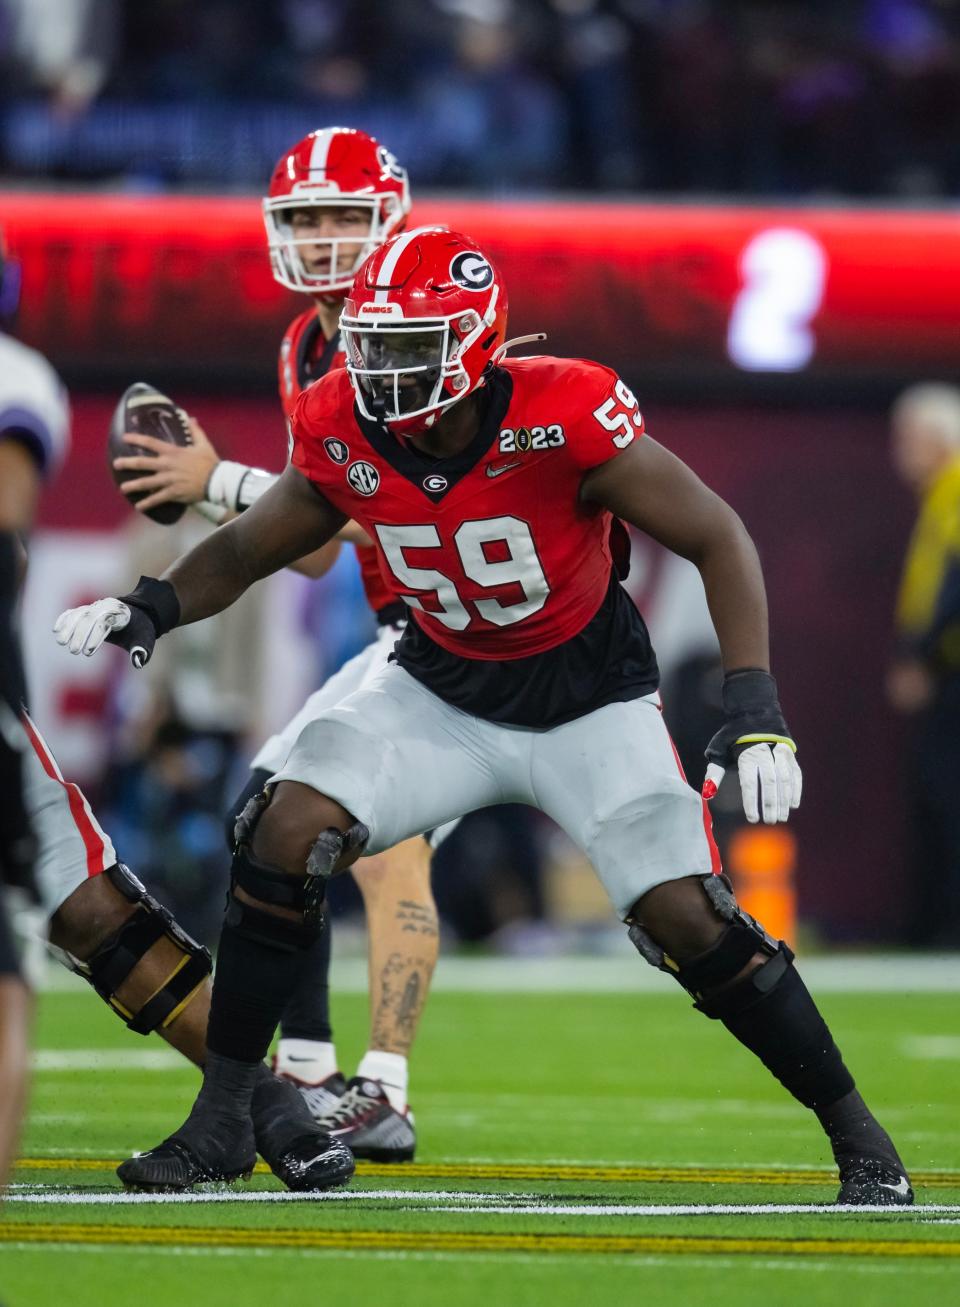 The Steelers traded up three spots to No. 14 on Thursday to take Georgia tackle Broderick Jones. Is cornerback a possibility with the first pick in the second round?